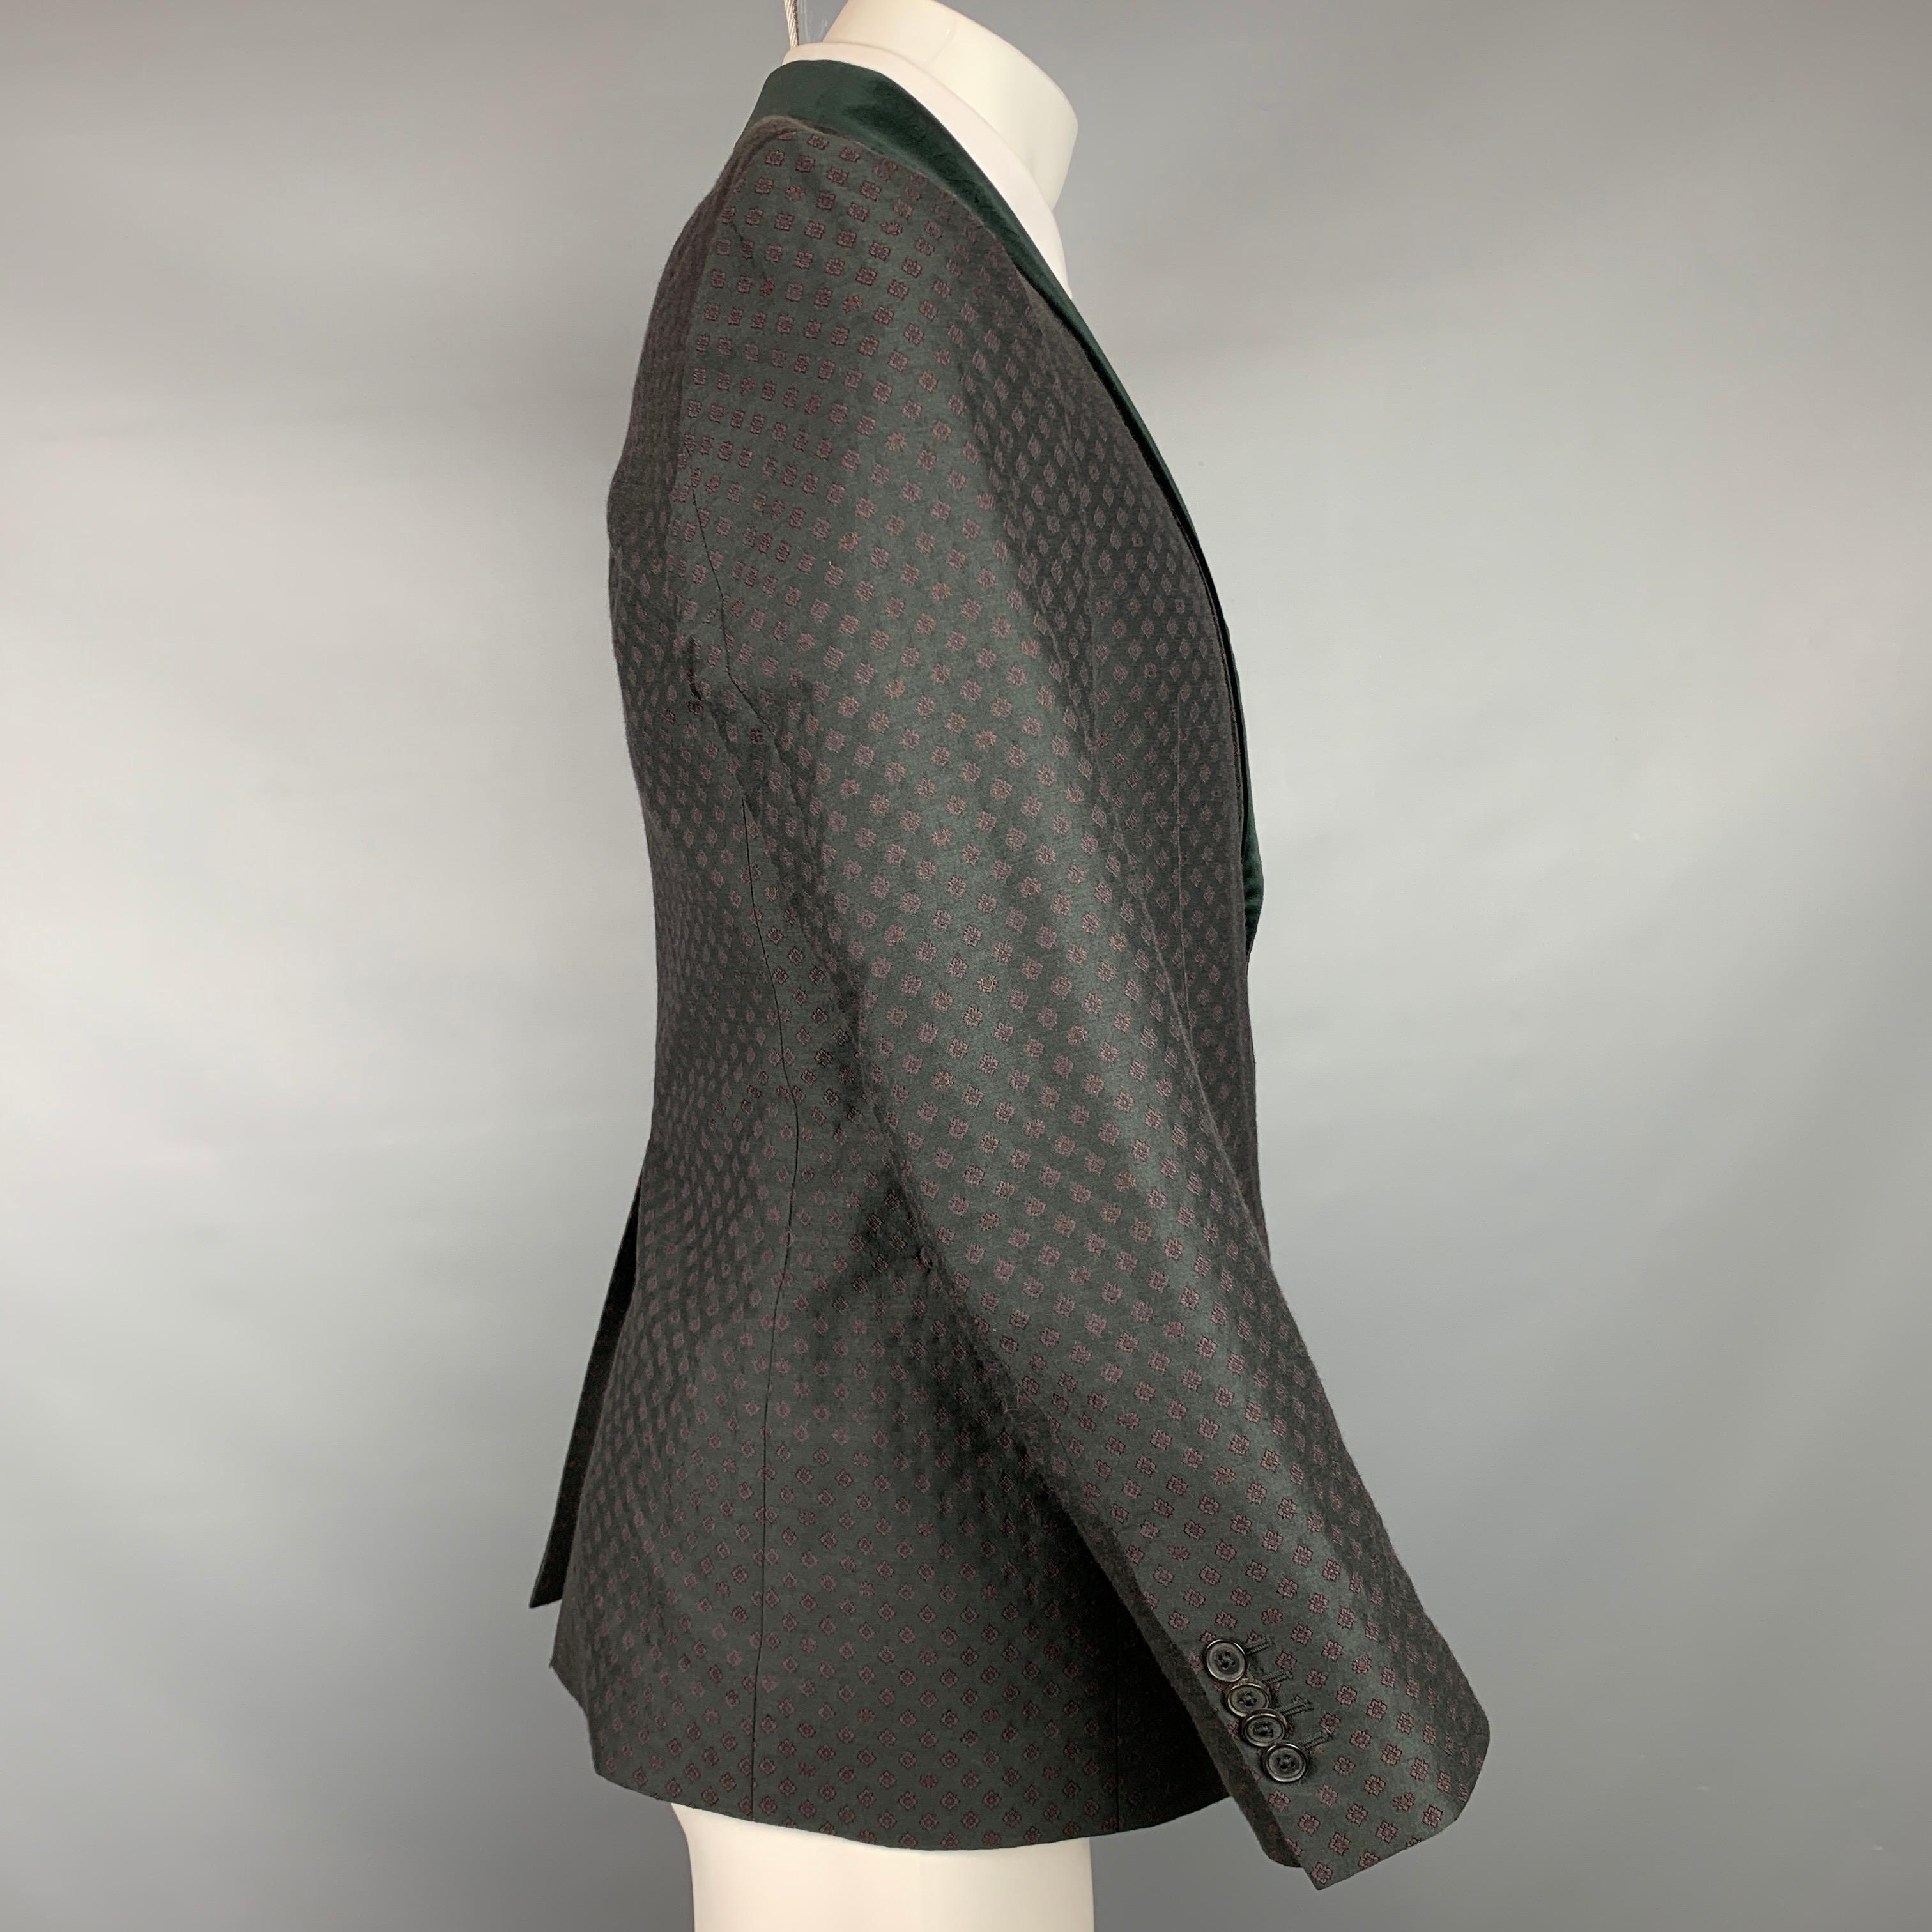 SALVATORE FERRAGAMO sport coat comes in a black & burgundy wool / silk with a full liner featuring a shawl collar, slit pockets, and a double button closure. Made in Italy.

Very Good Pre-Owned Condition.
Marked: 48

Measurements:

Shoulder: 16.5